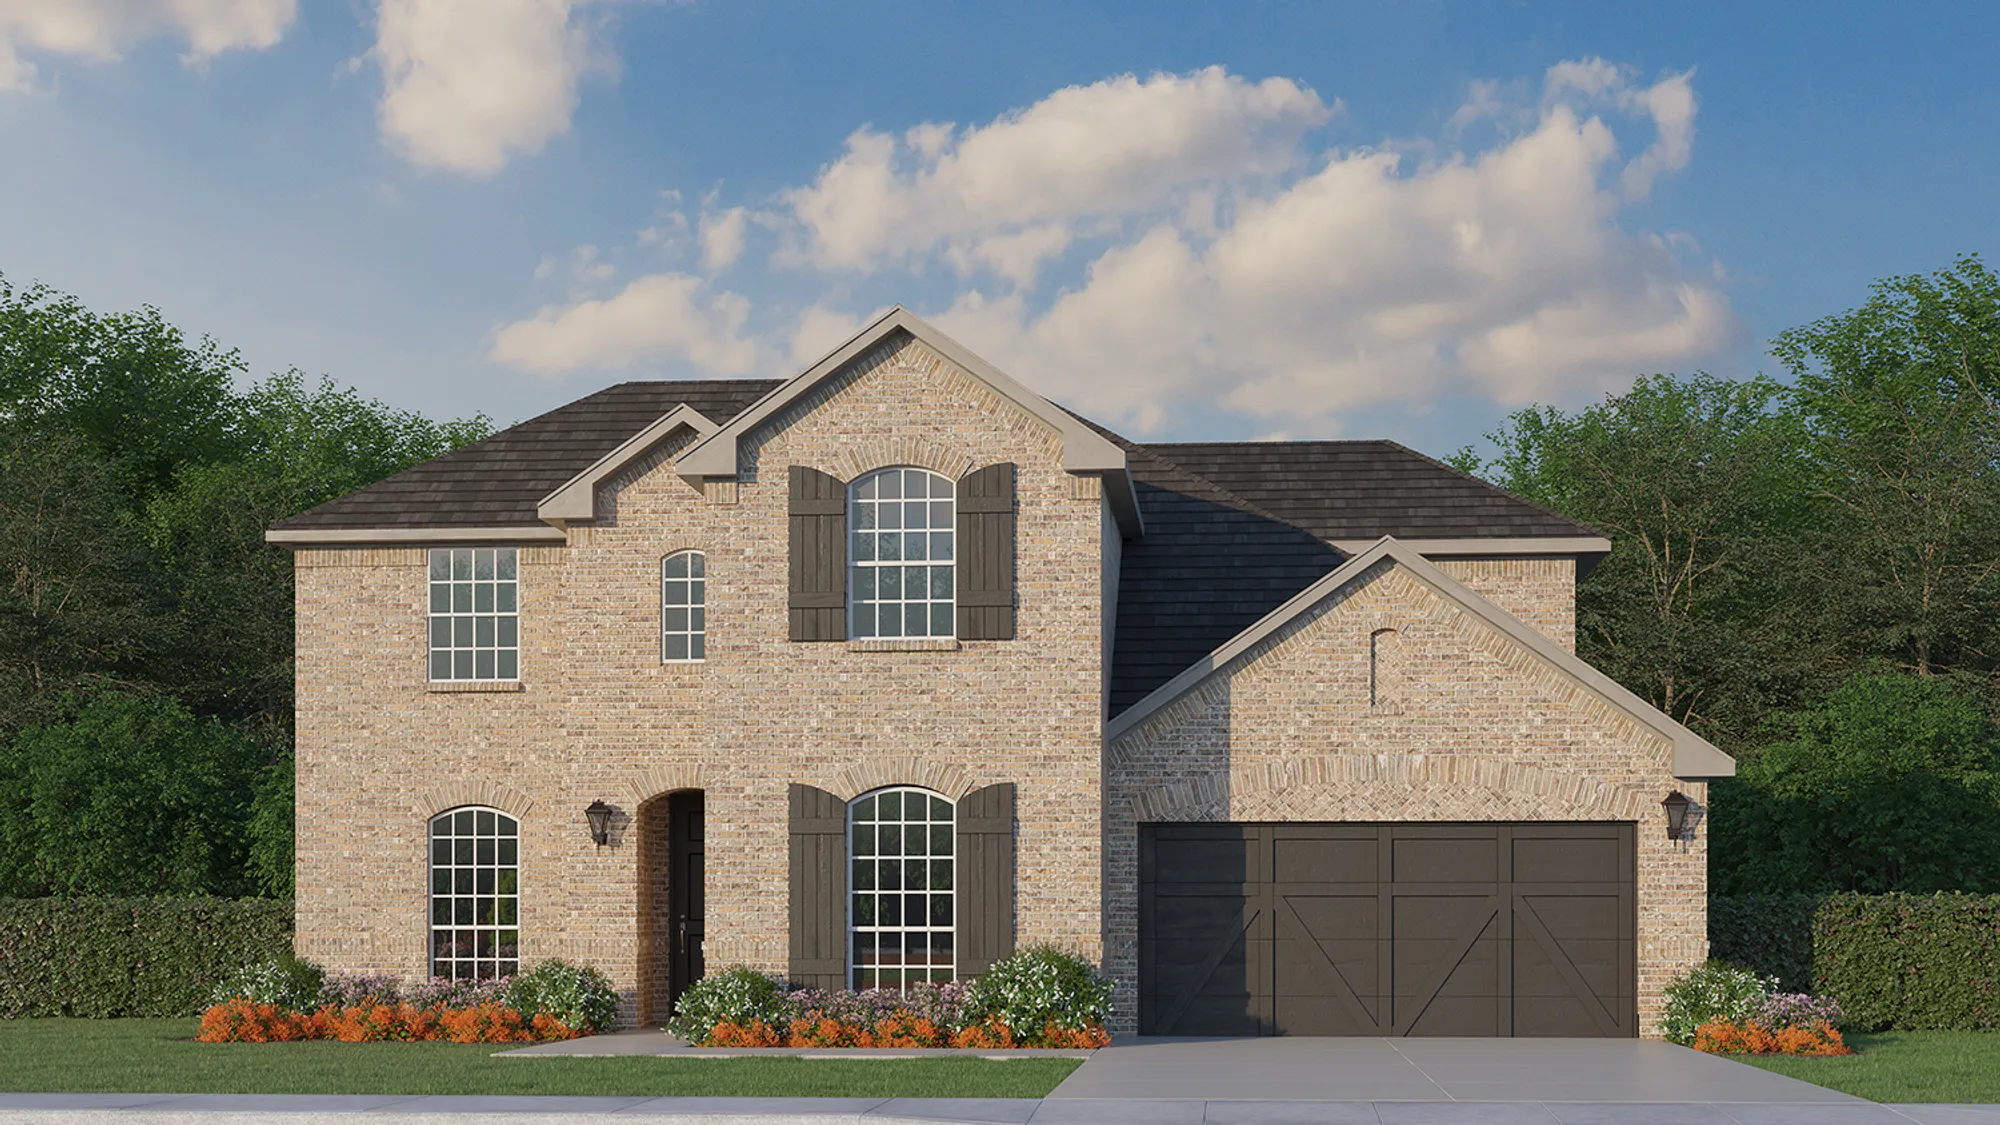 Plan 1689 Elevation A by American Legend Homes